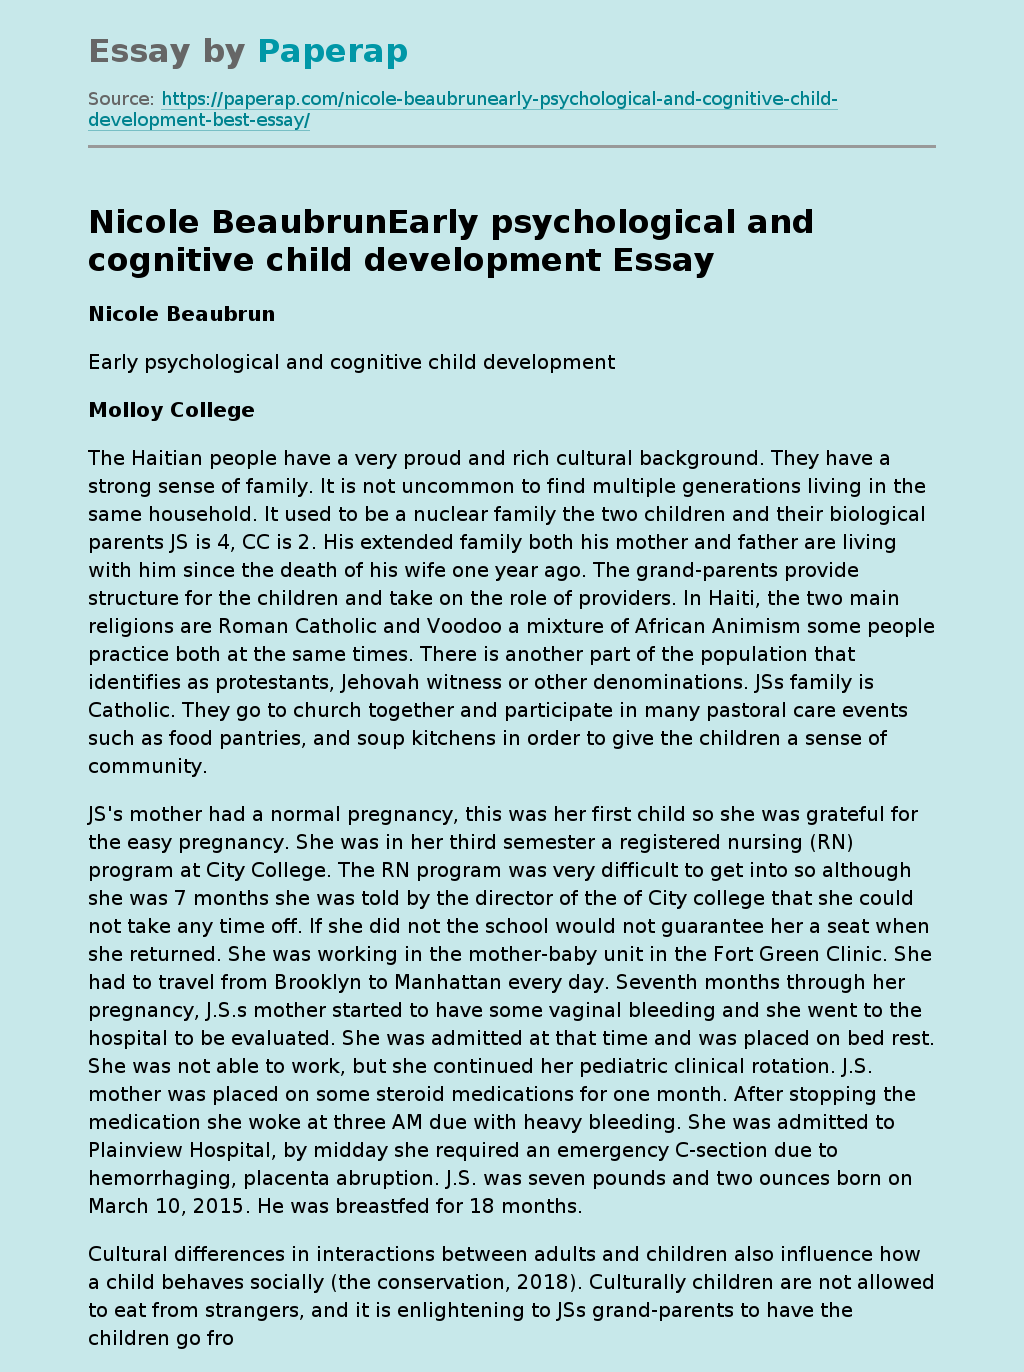 Early Psychological and Cognitive Child Development